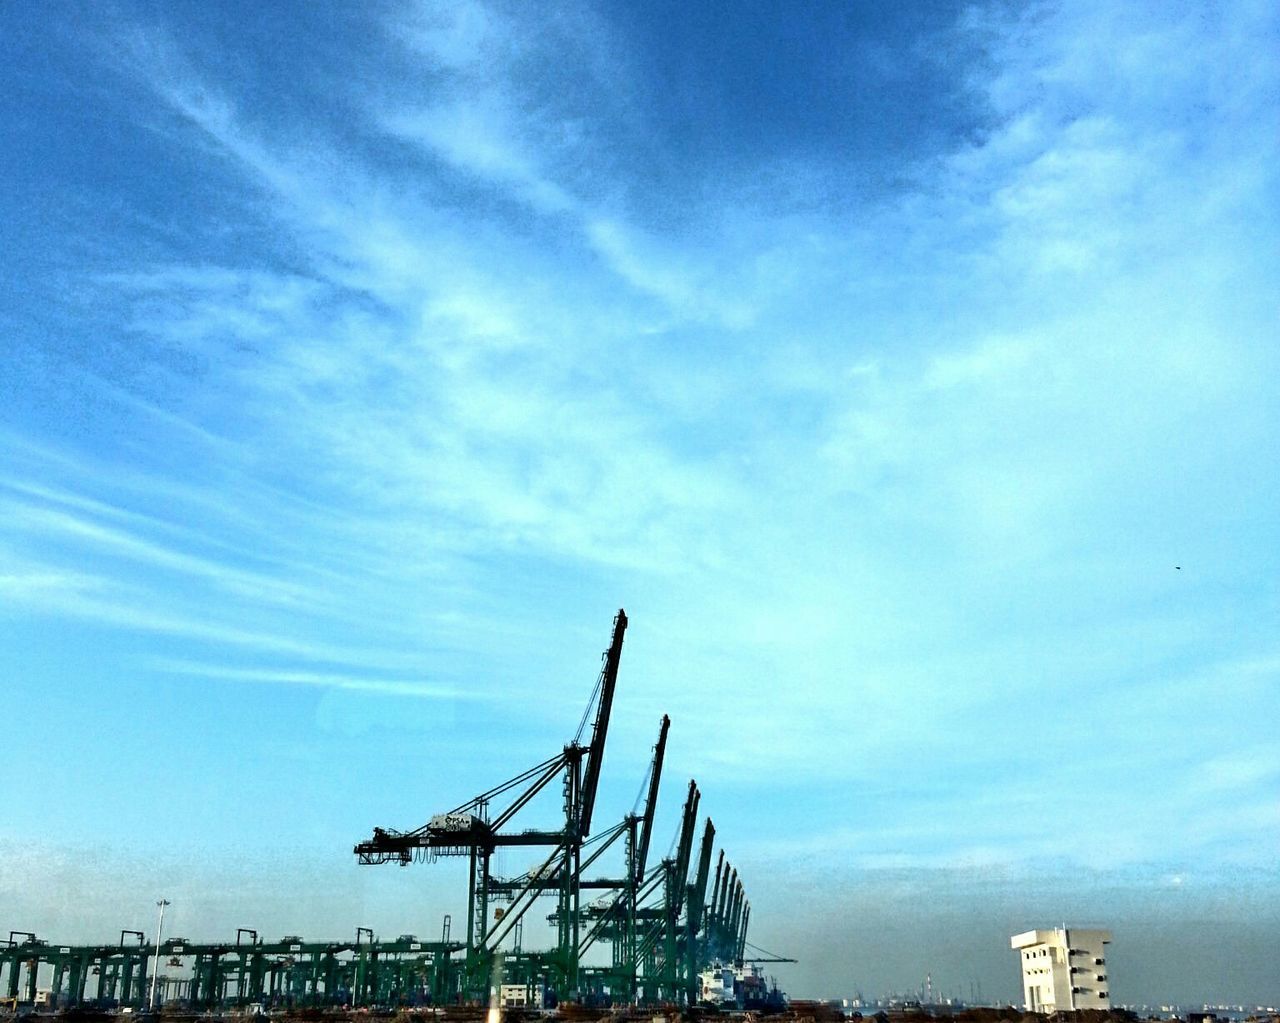 Row of cranes at commercial dock against sky